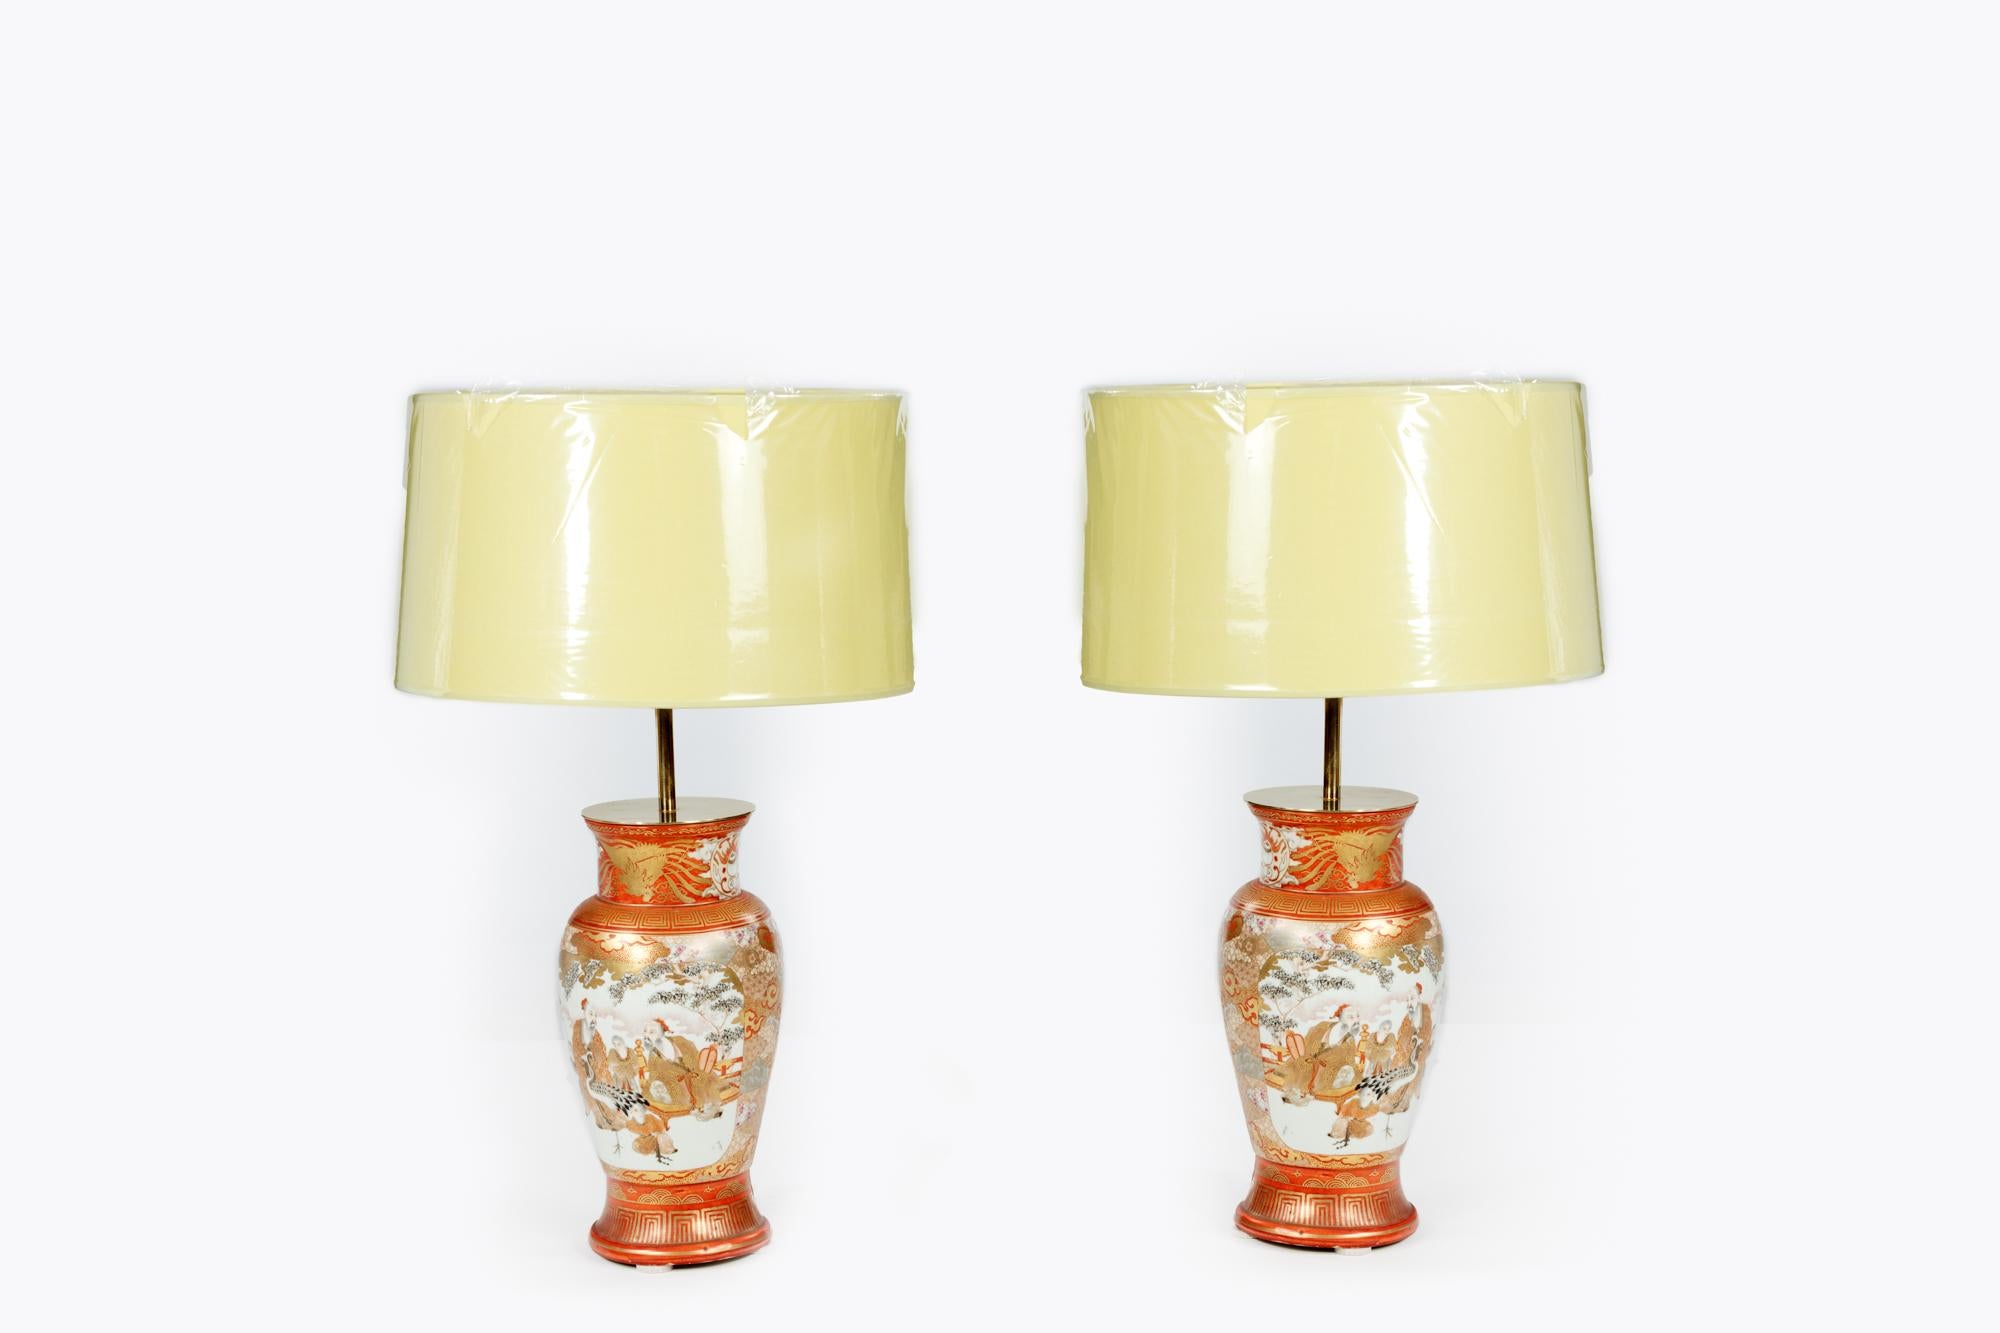 Pair of antique Japanese vases converted into table lamps complete with matching contemporary shades. They have been decorated in the traditional taste and feature geometric cartouches on both the rims and bases. Both display garden scenes showing